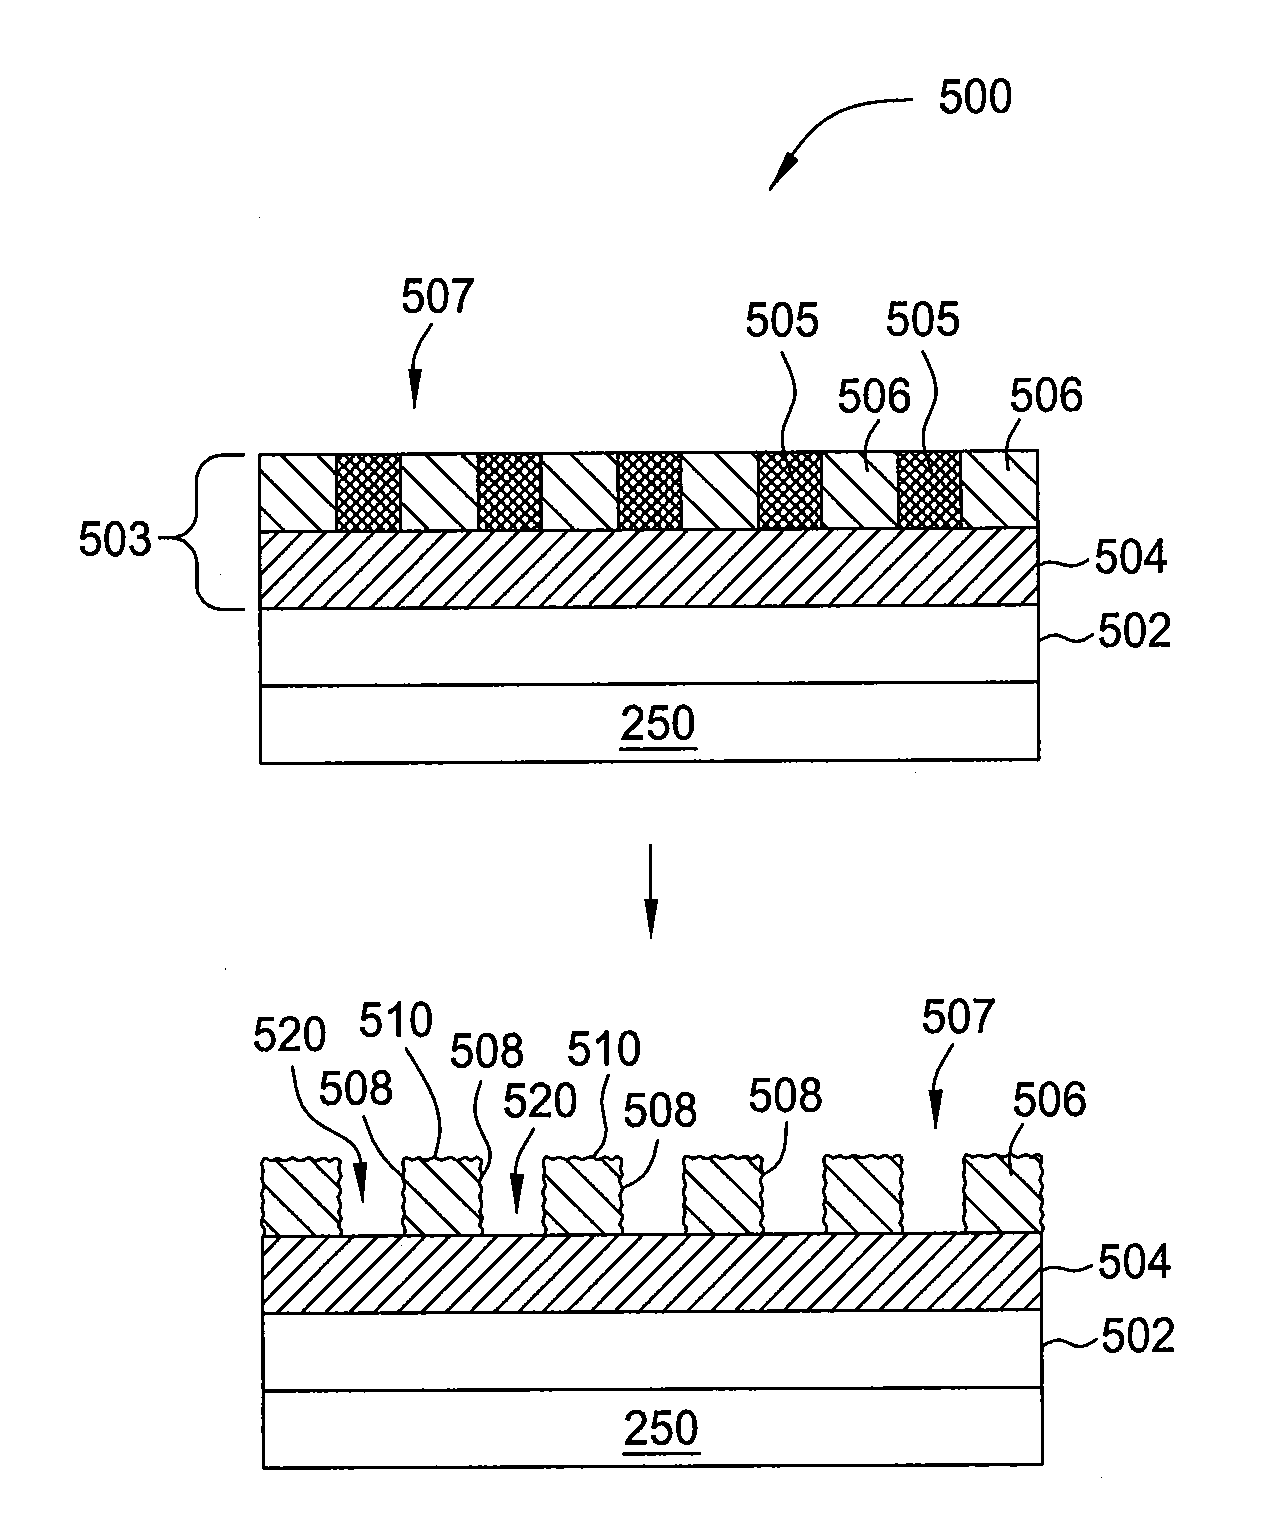 Methods and apparatus for performing multiple photoresist layer development and etching processes